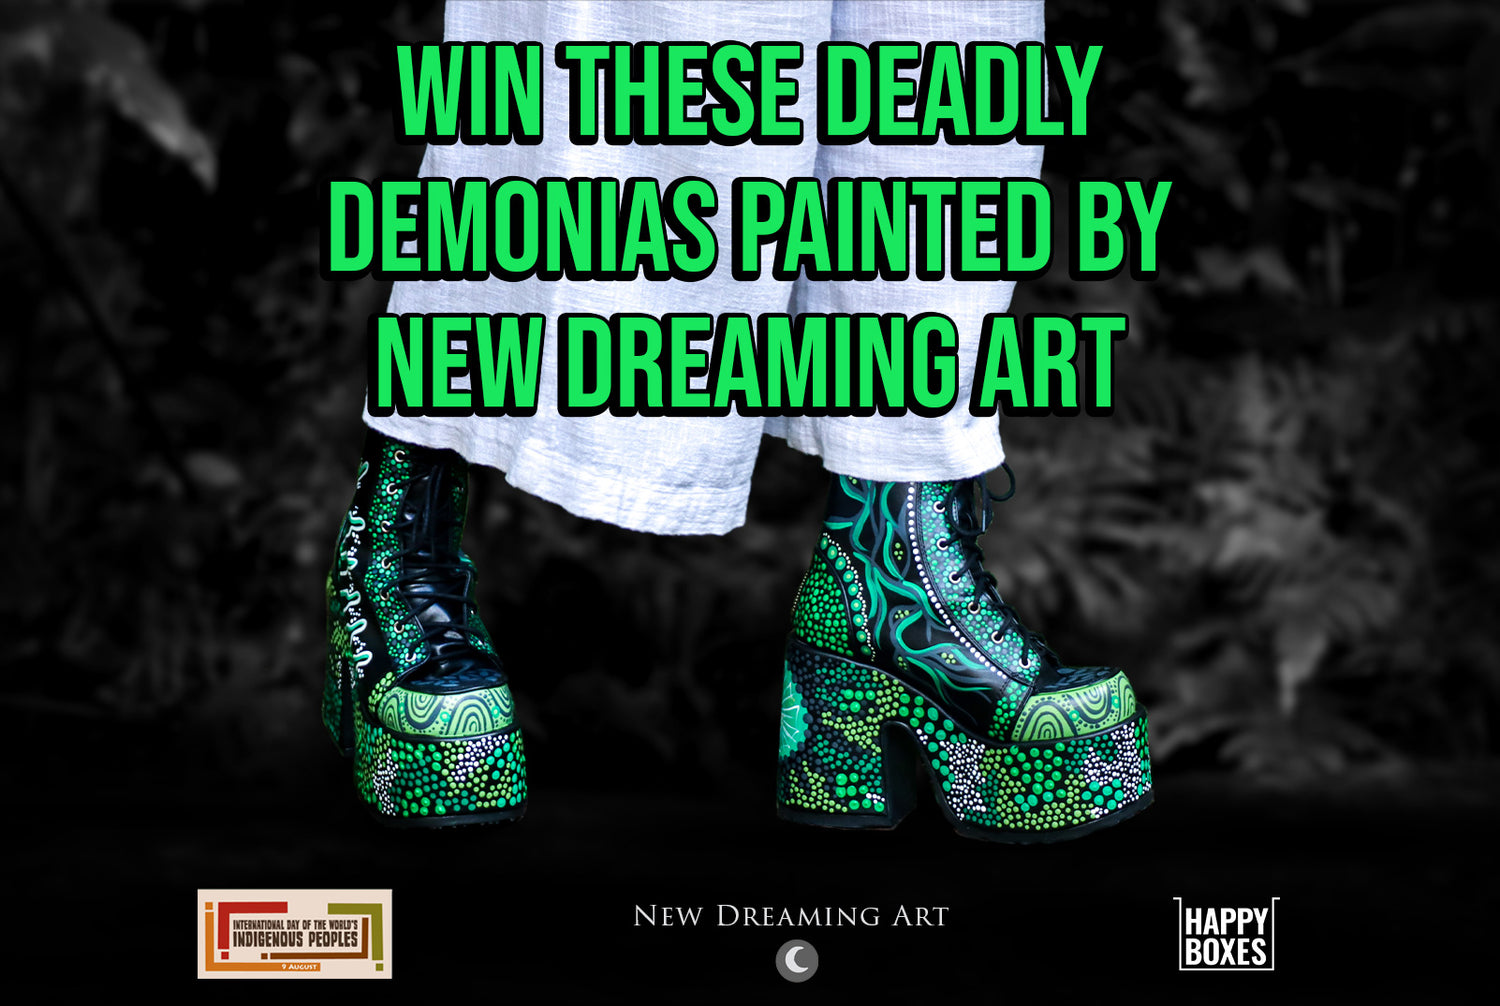 Win a pair of Demonias painted by New Dreaming Art | Image depicts a photograph of artist Nikita Fitzpatrick wearing the hand-painted Demonia Camel-203s in front of a blurred black and white forest background. Logos for IDOWIP and Happy Boxes are shown.